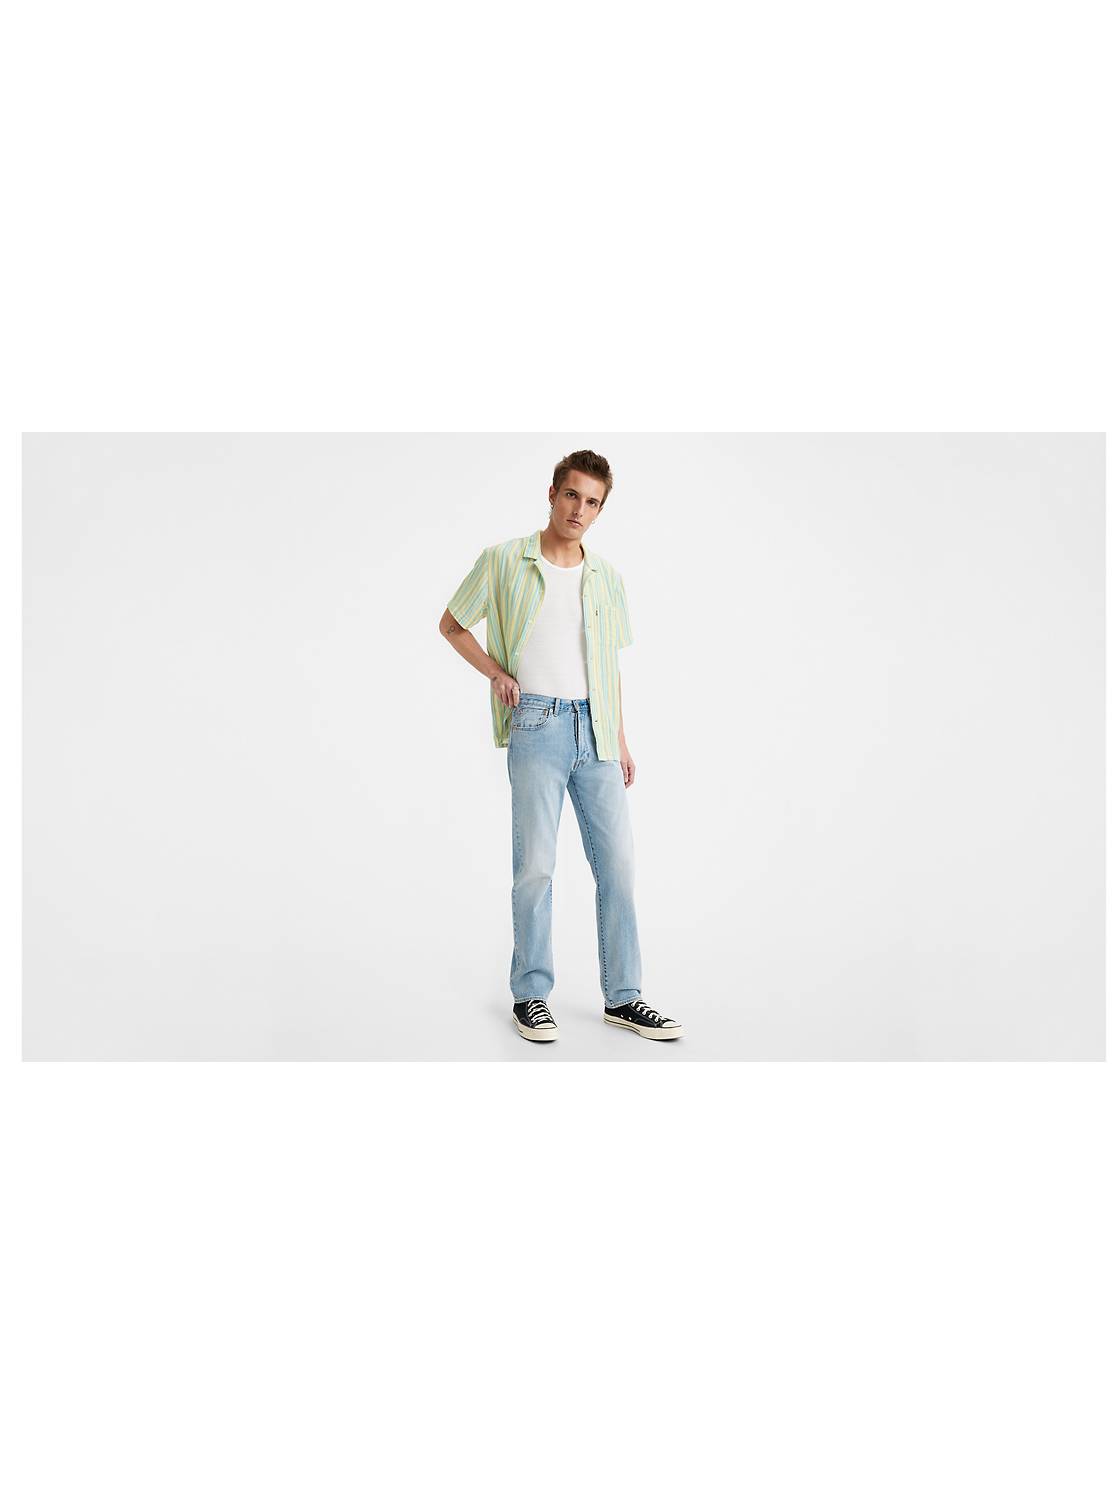 Shrink-to-fit™ Stretch Jeans By Fit Number | Levi's® US